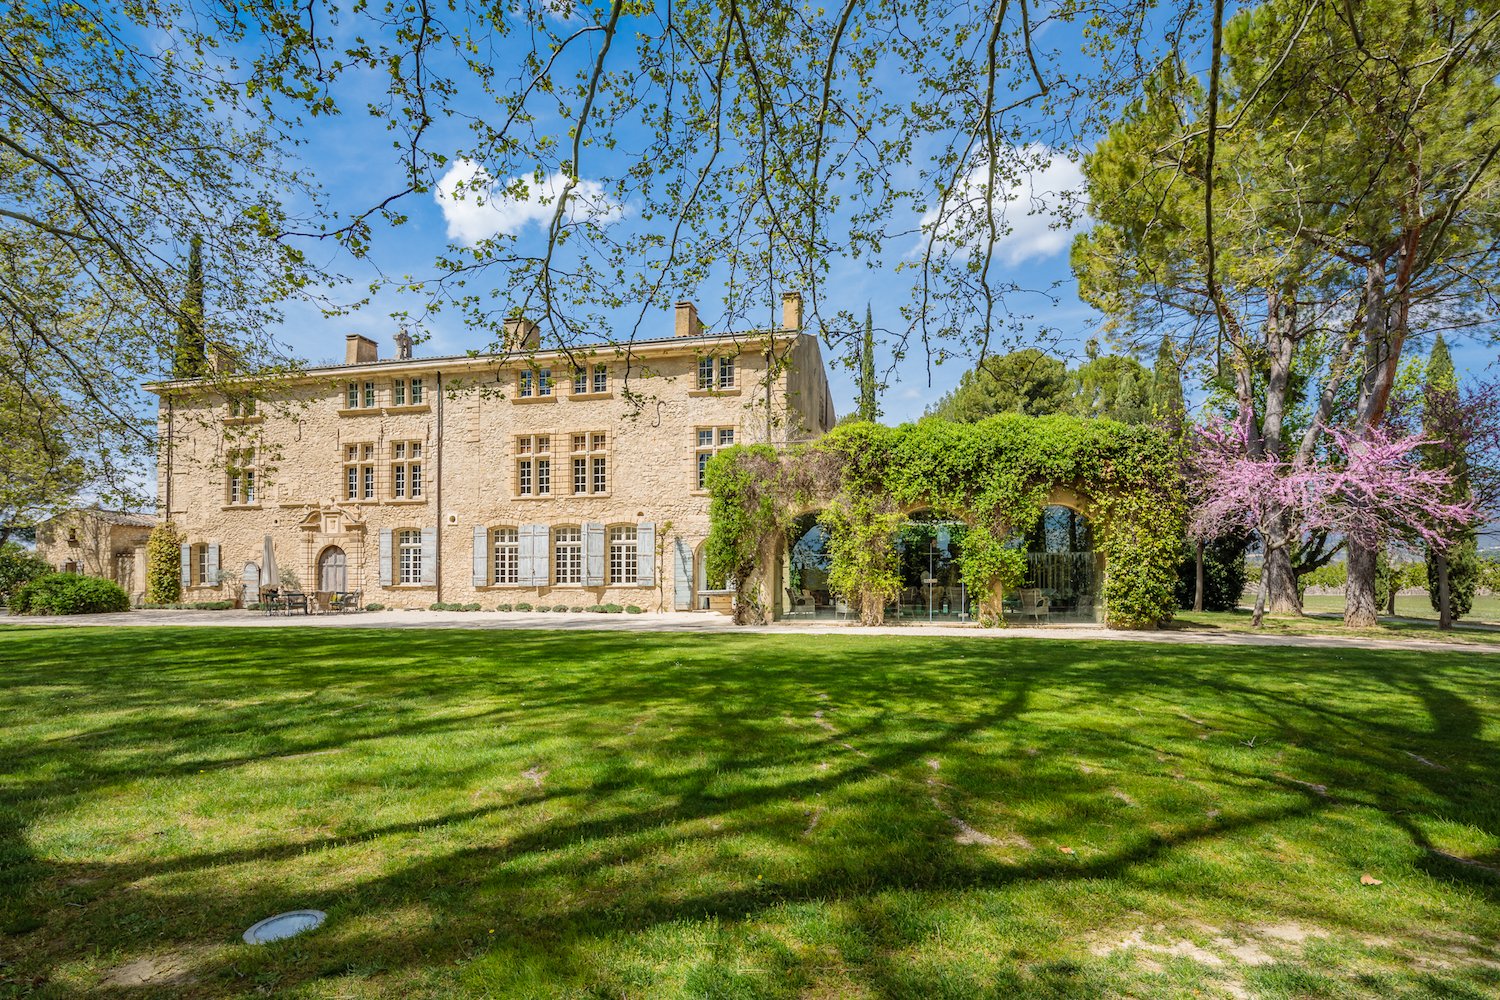 Provencal castle in the heart of the Luberon